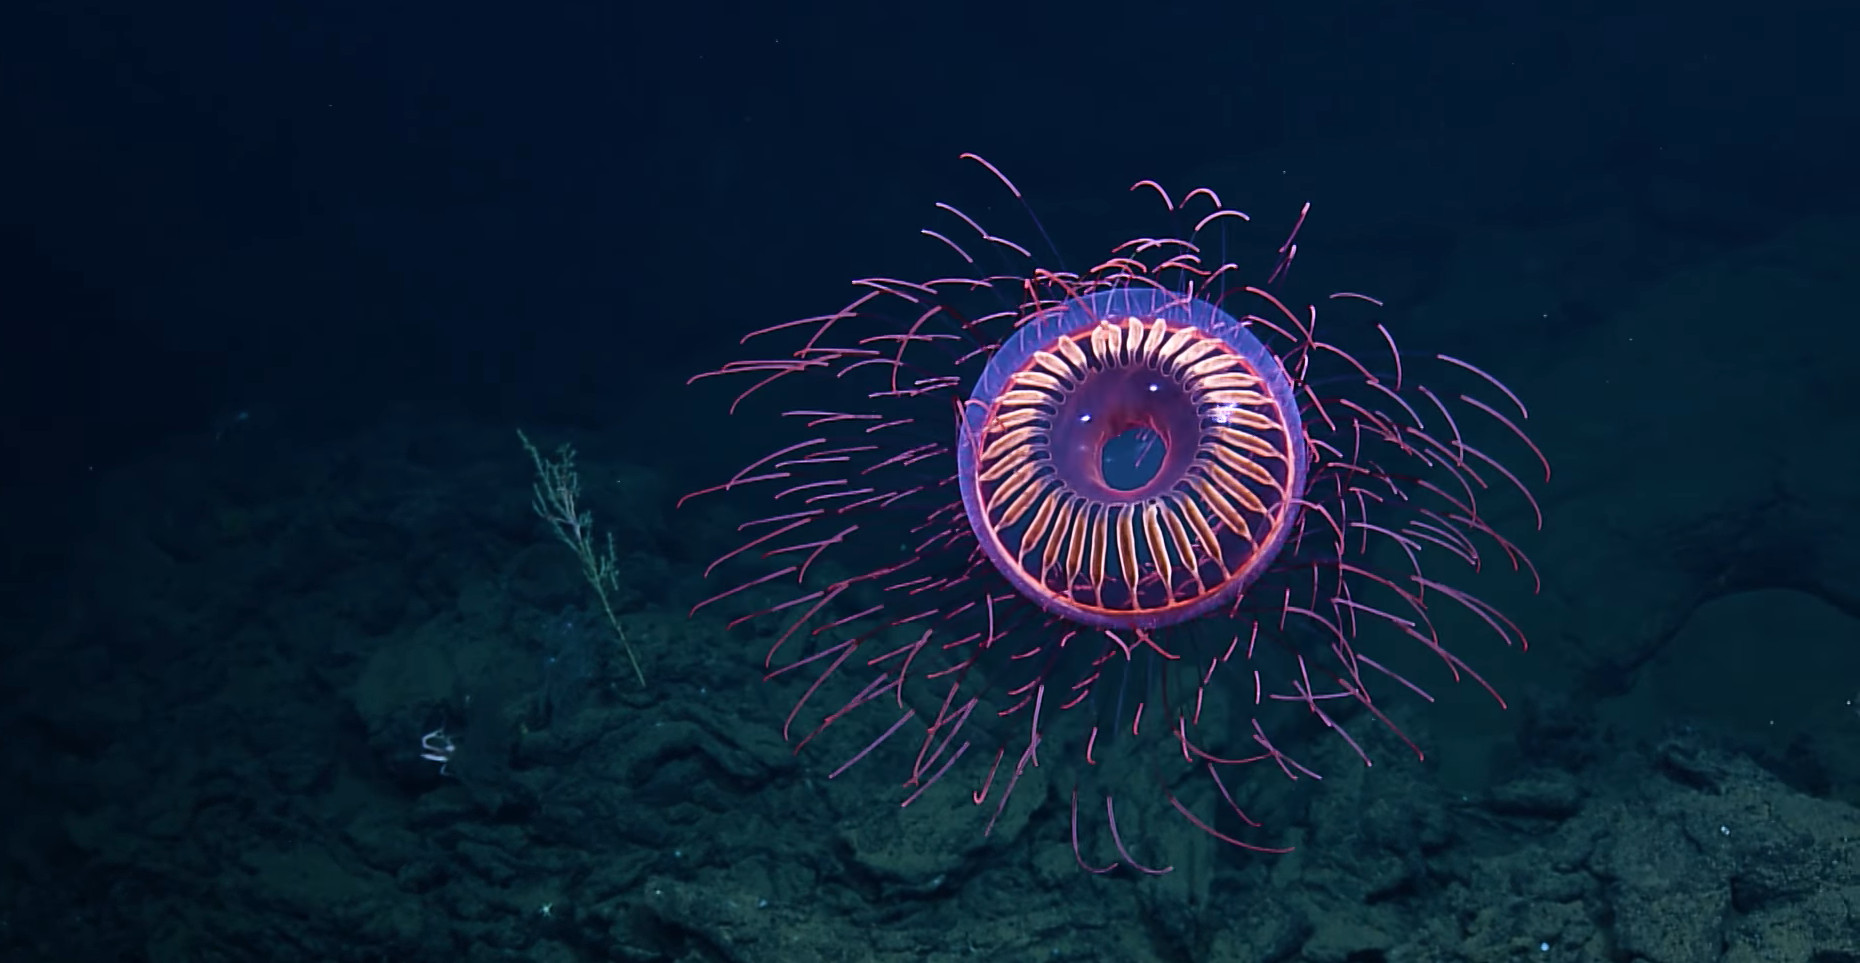 Monday Archives: A Fireworks Jelly (Halitrephes) To Ring In The New Year